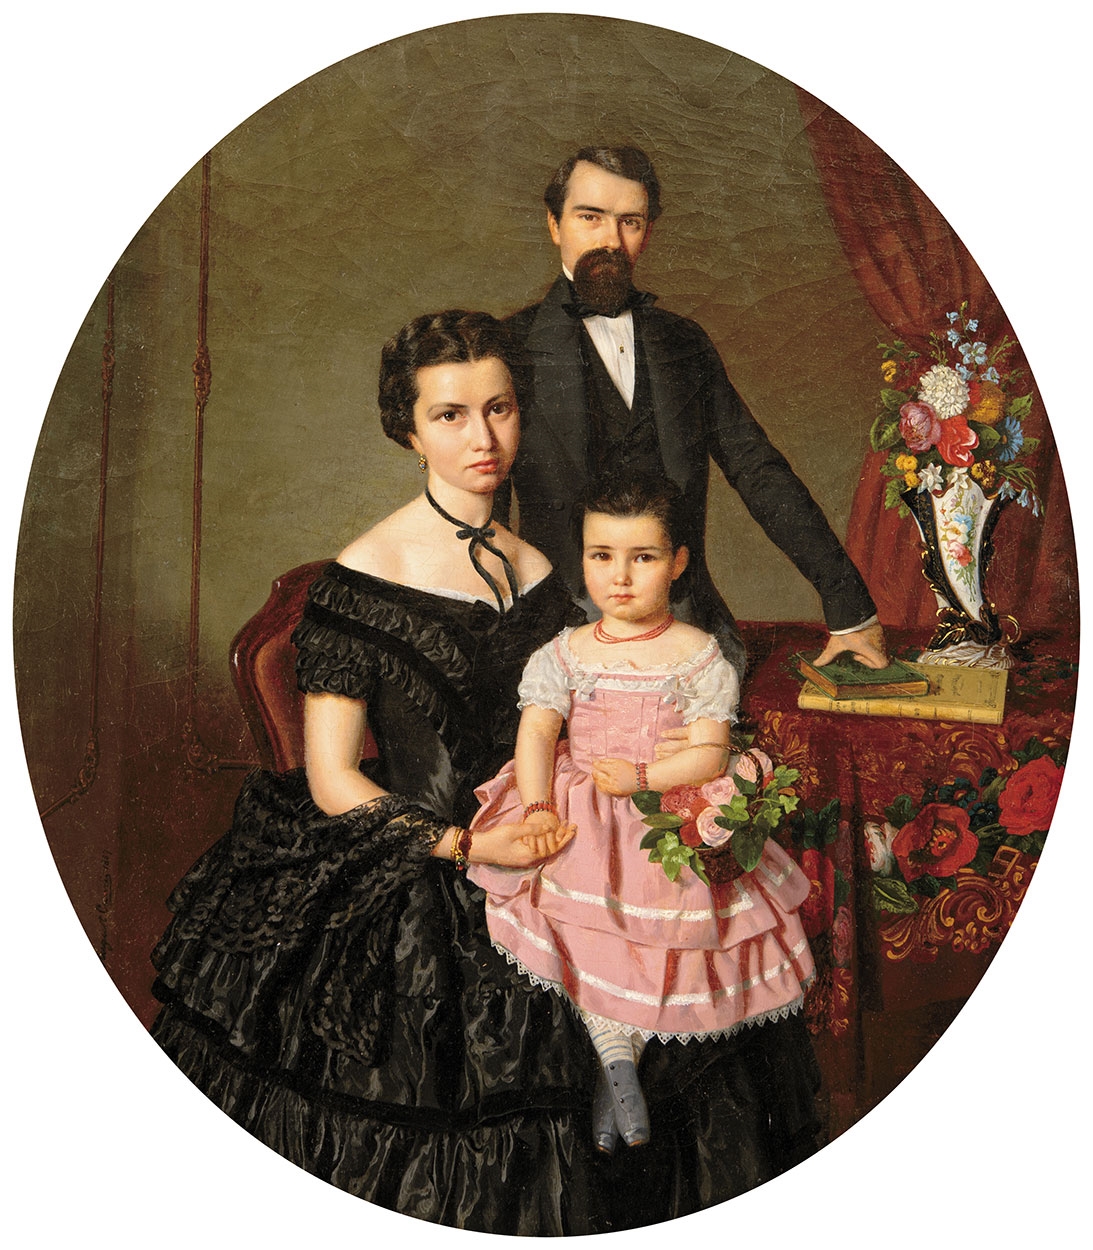 The Wabrosch Family by August Alexius Canzi, 1857